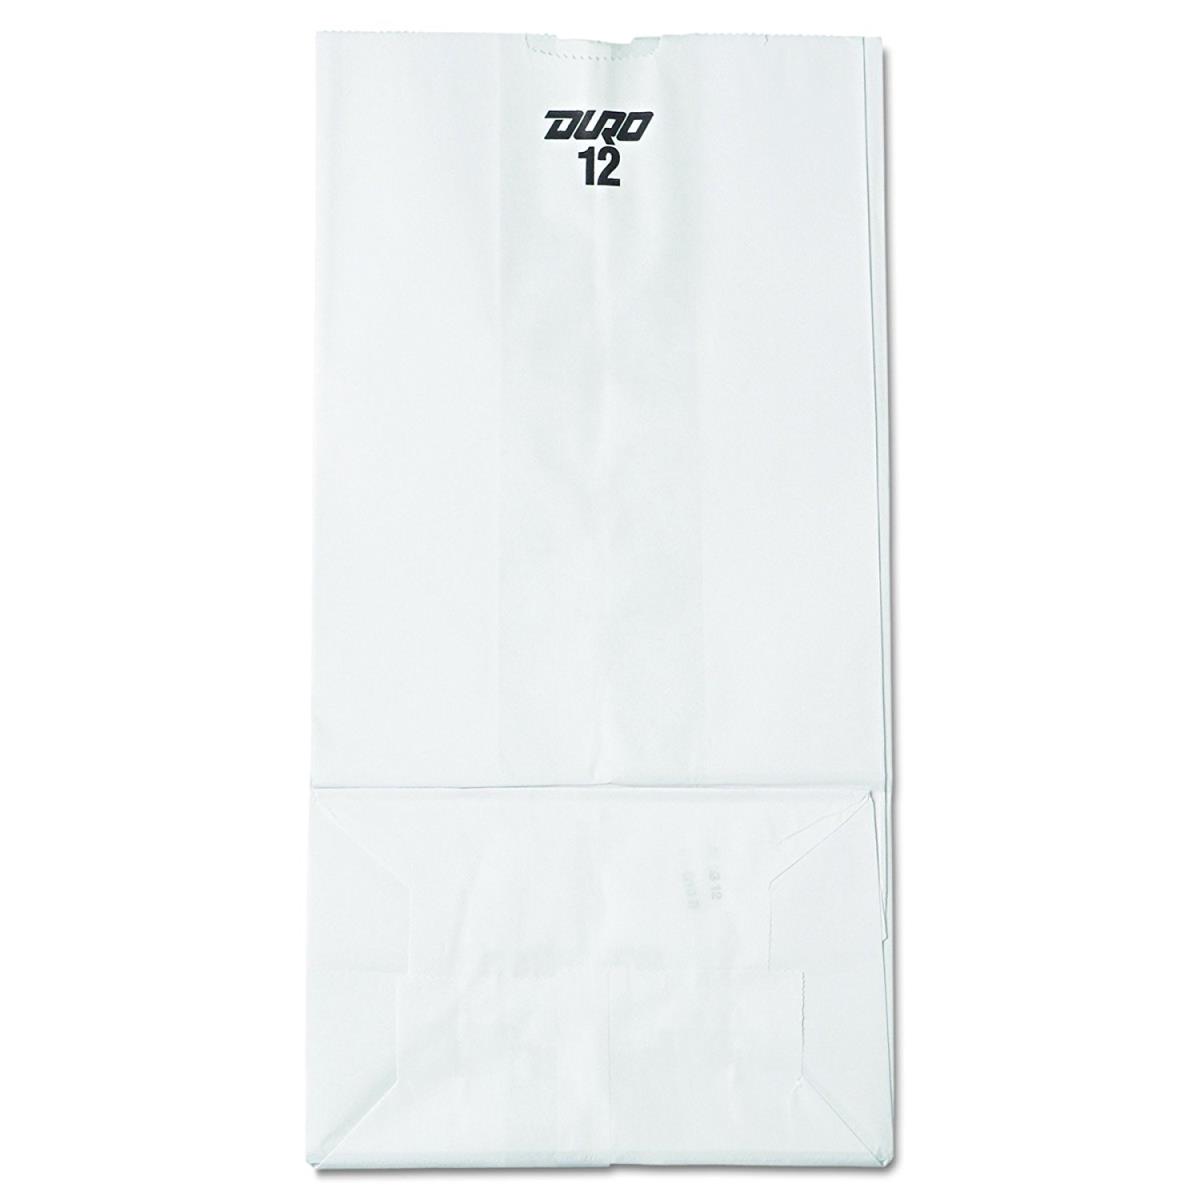 51032 Pec 12 Lbs Wolf Grocery Bag, White - Pack Of 500